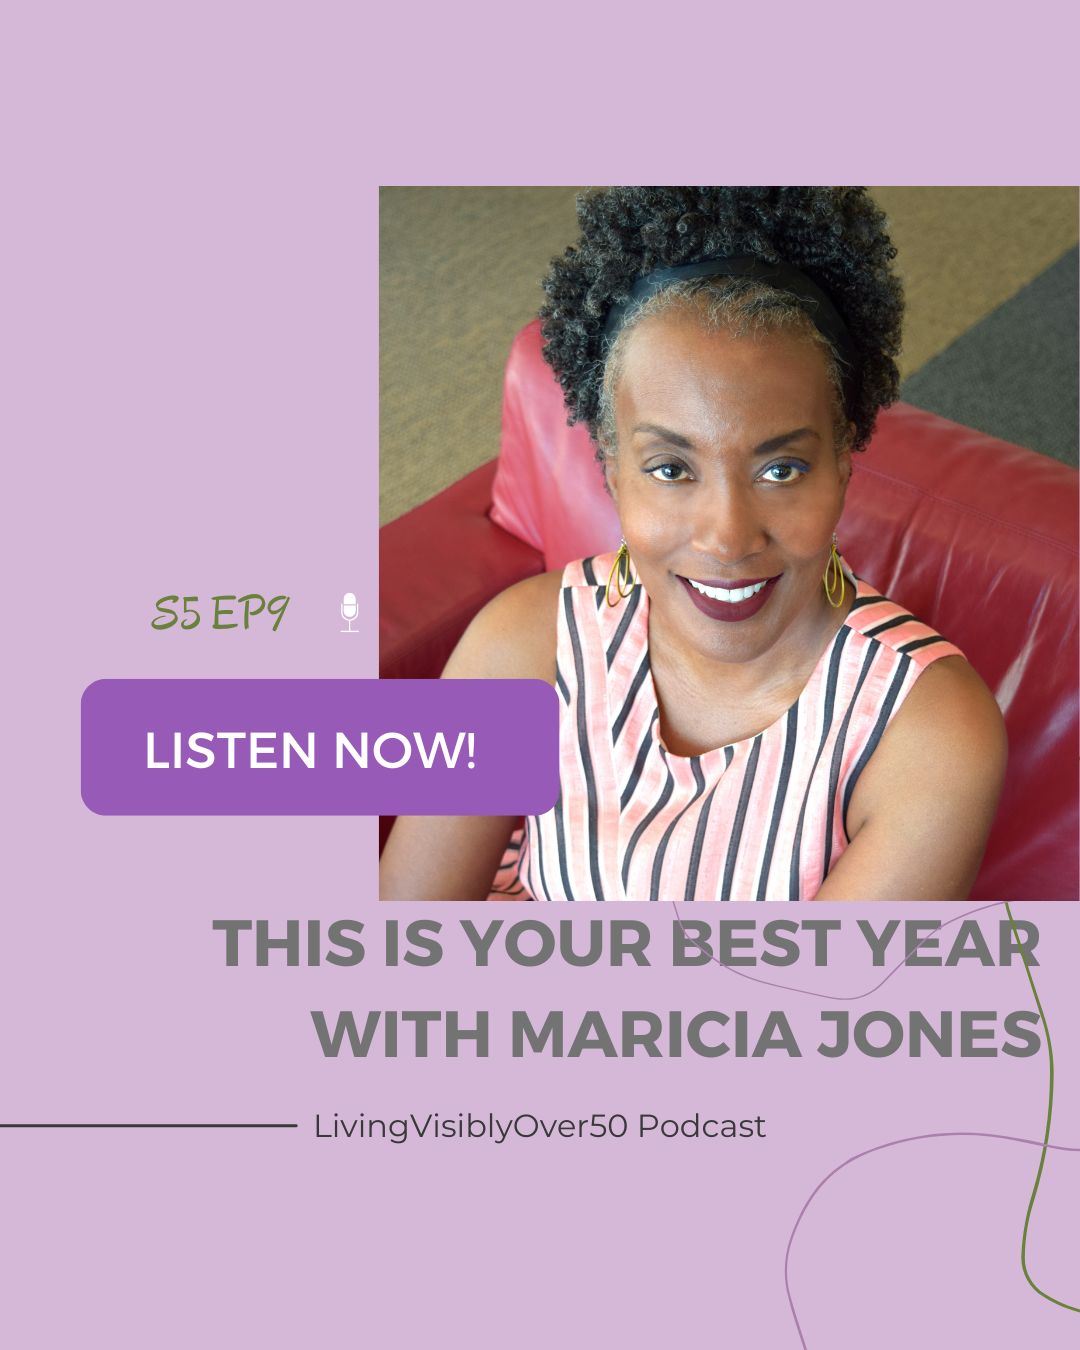 living visibly over 50 podcast with maricia jones interview